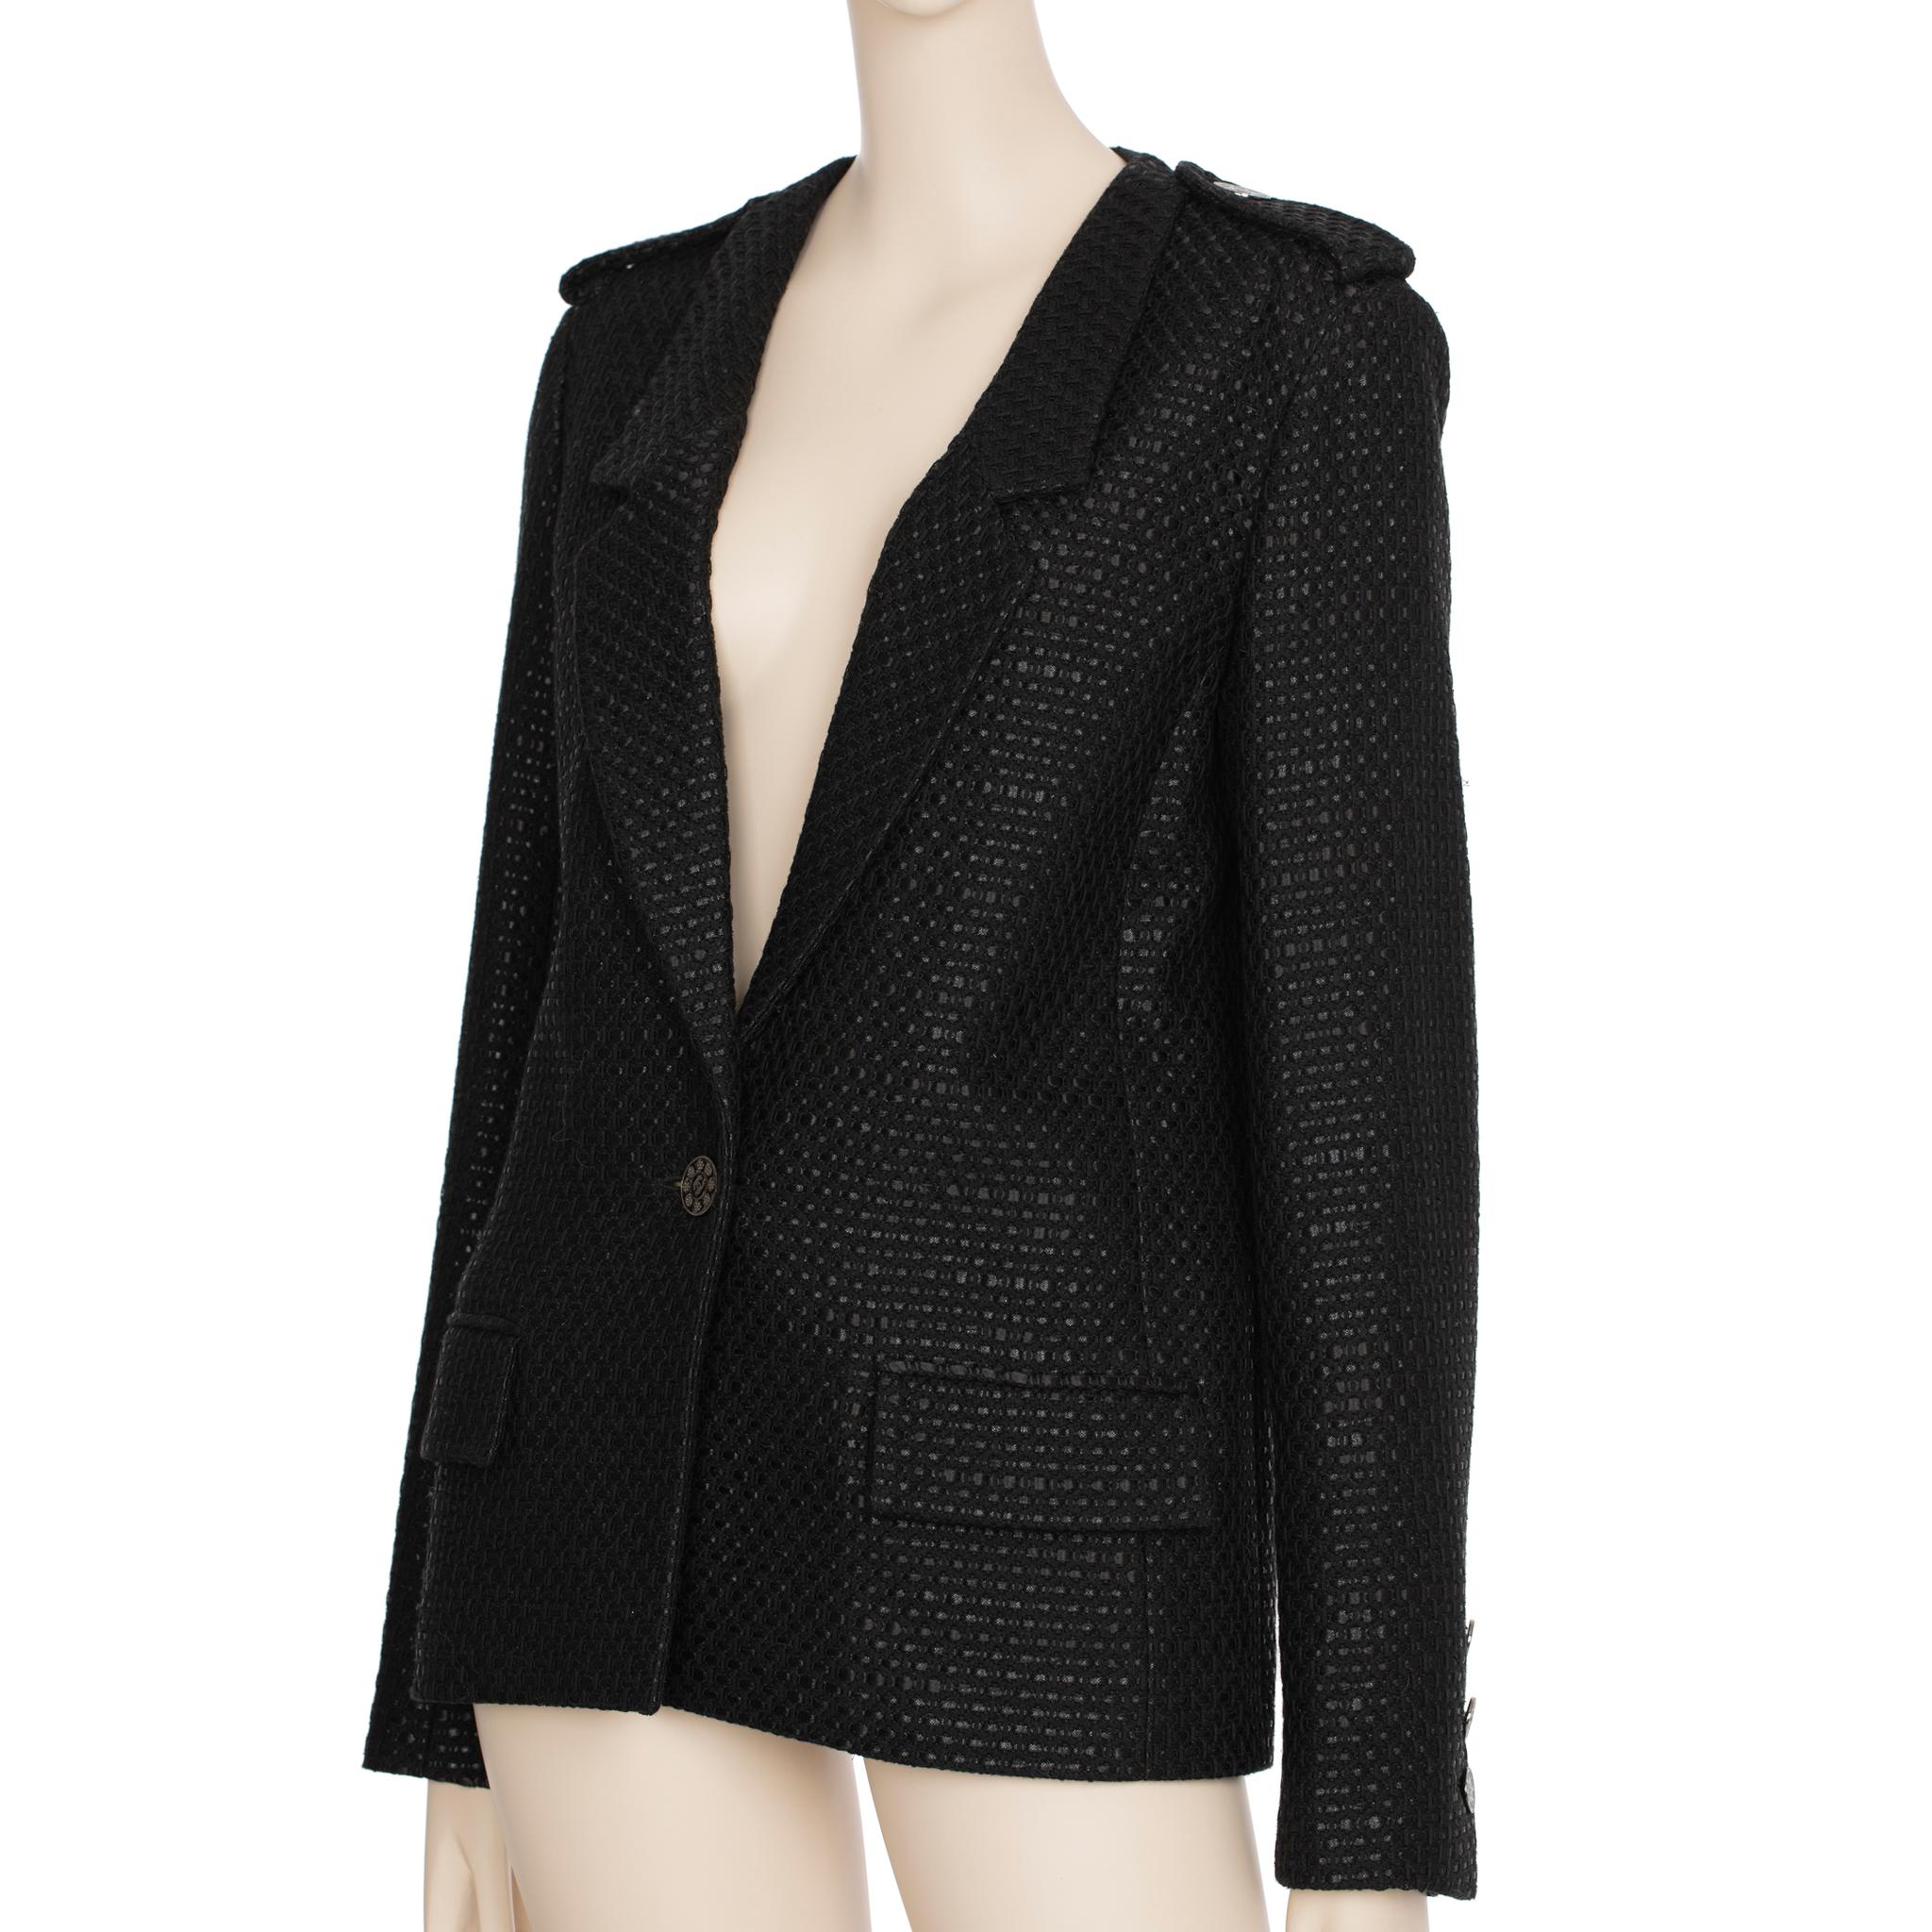 Chanel Black Tweed Blazer Single Button 42 FR In Excellent Condition For Sale In DOUBLE BAY, NSW